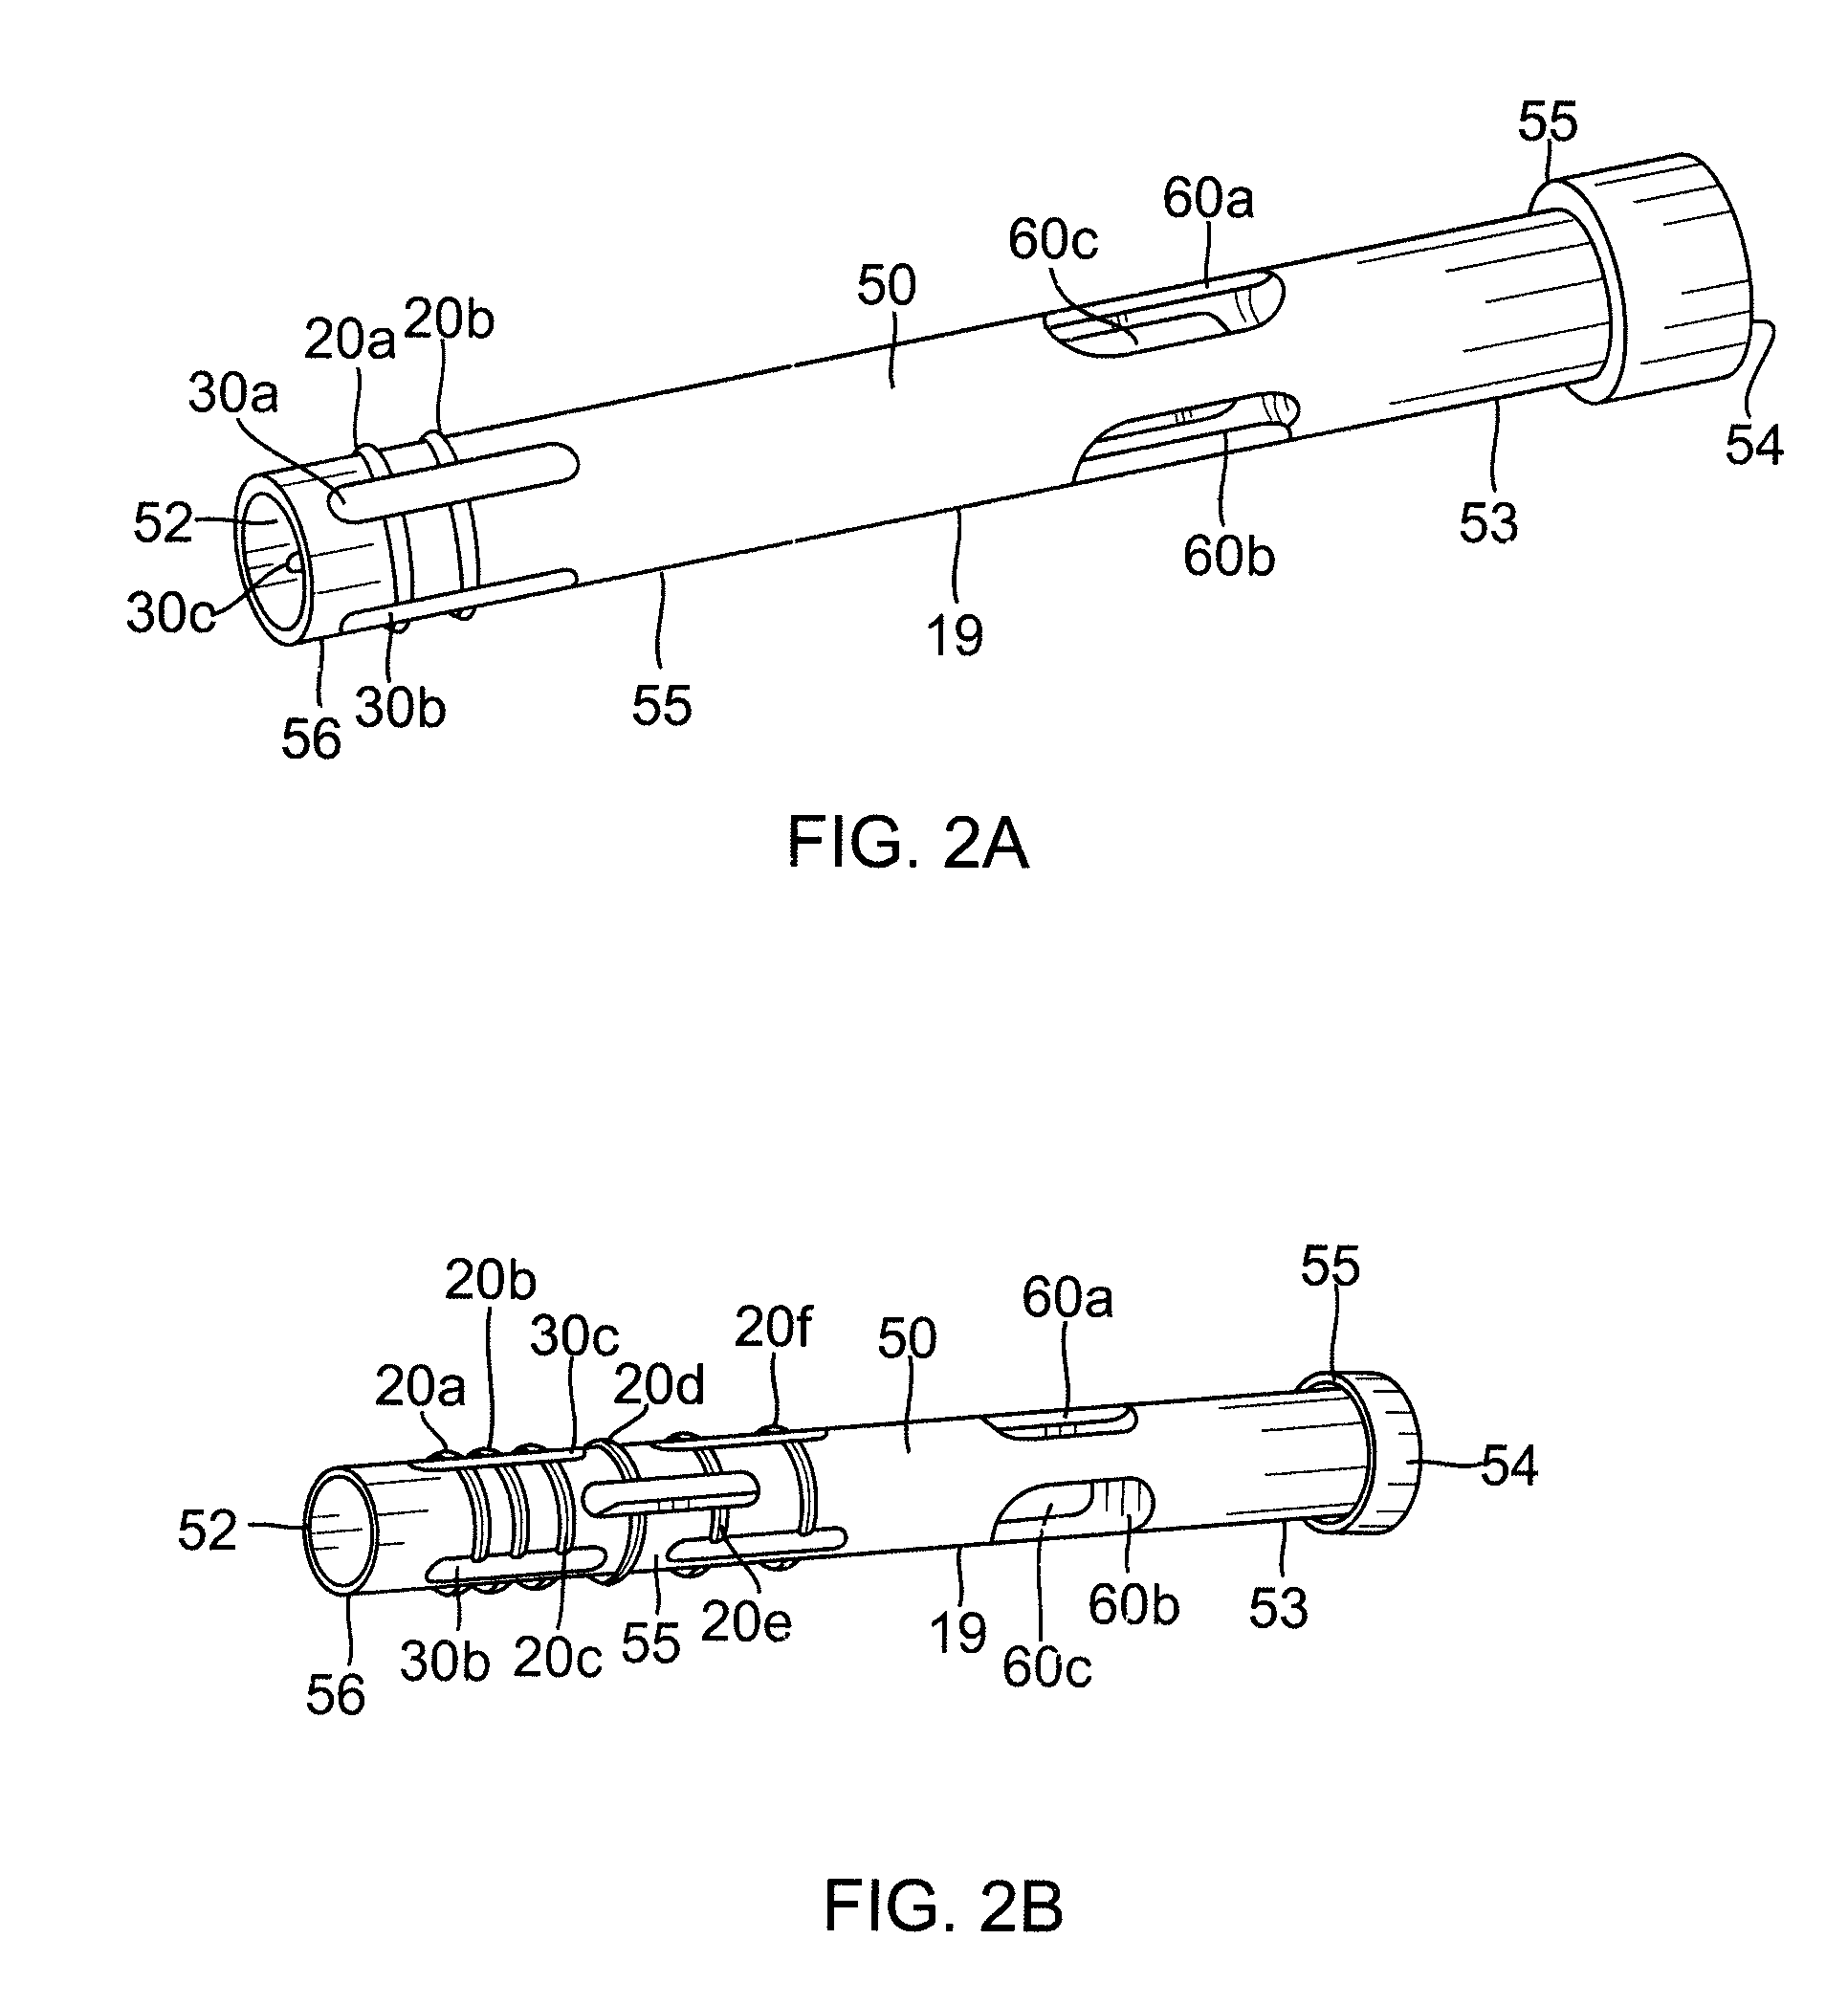 Apparatus for bone restoration of the spine and methods of use